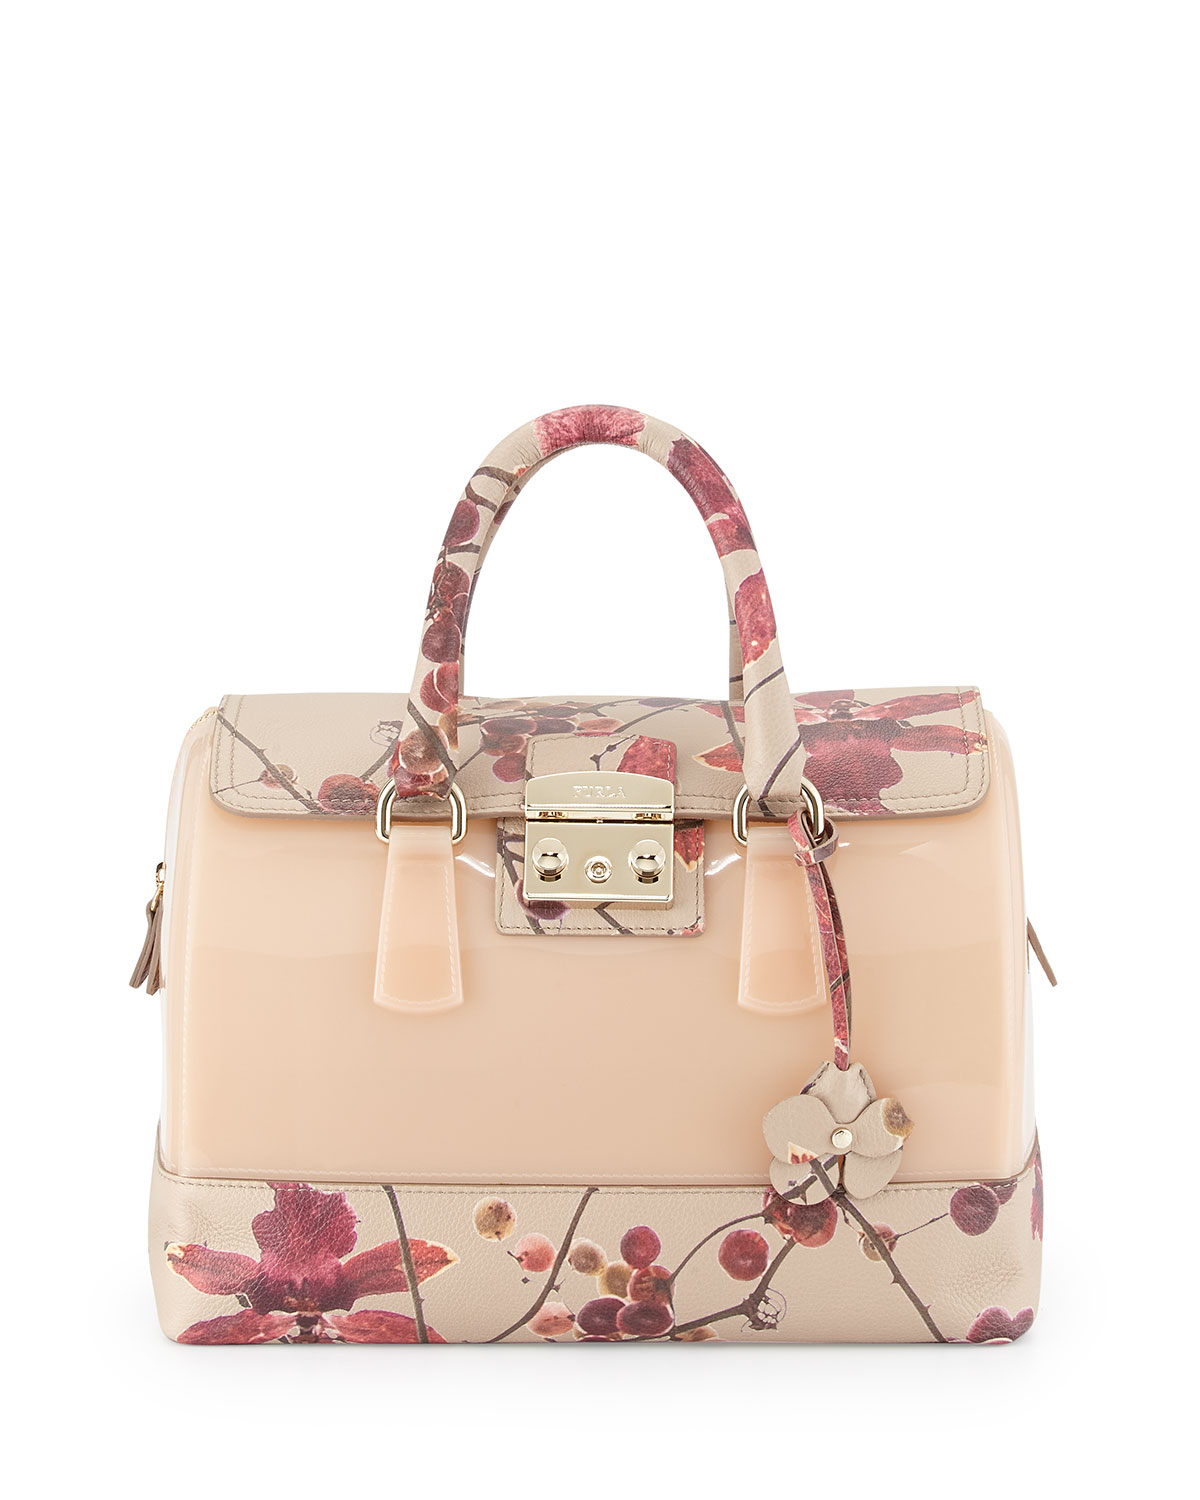 Lyst - Furla Candy Floral-print Leather Combo Satchel Bag Blushberry in ...